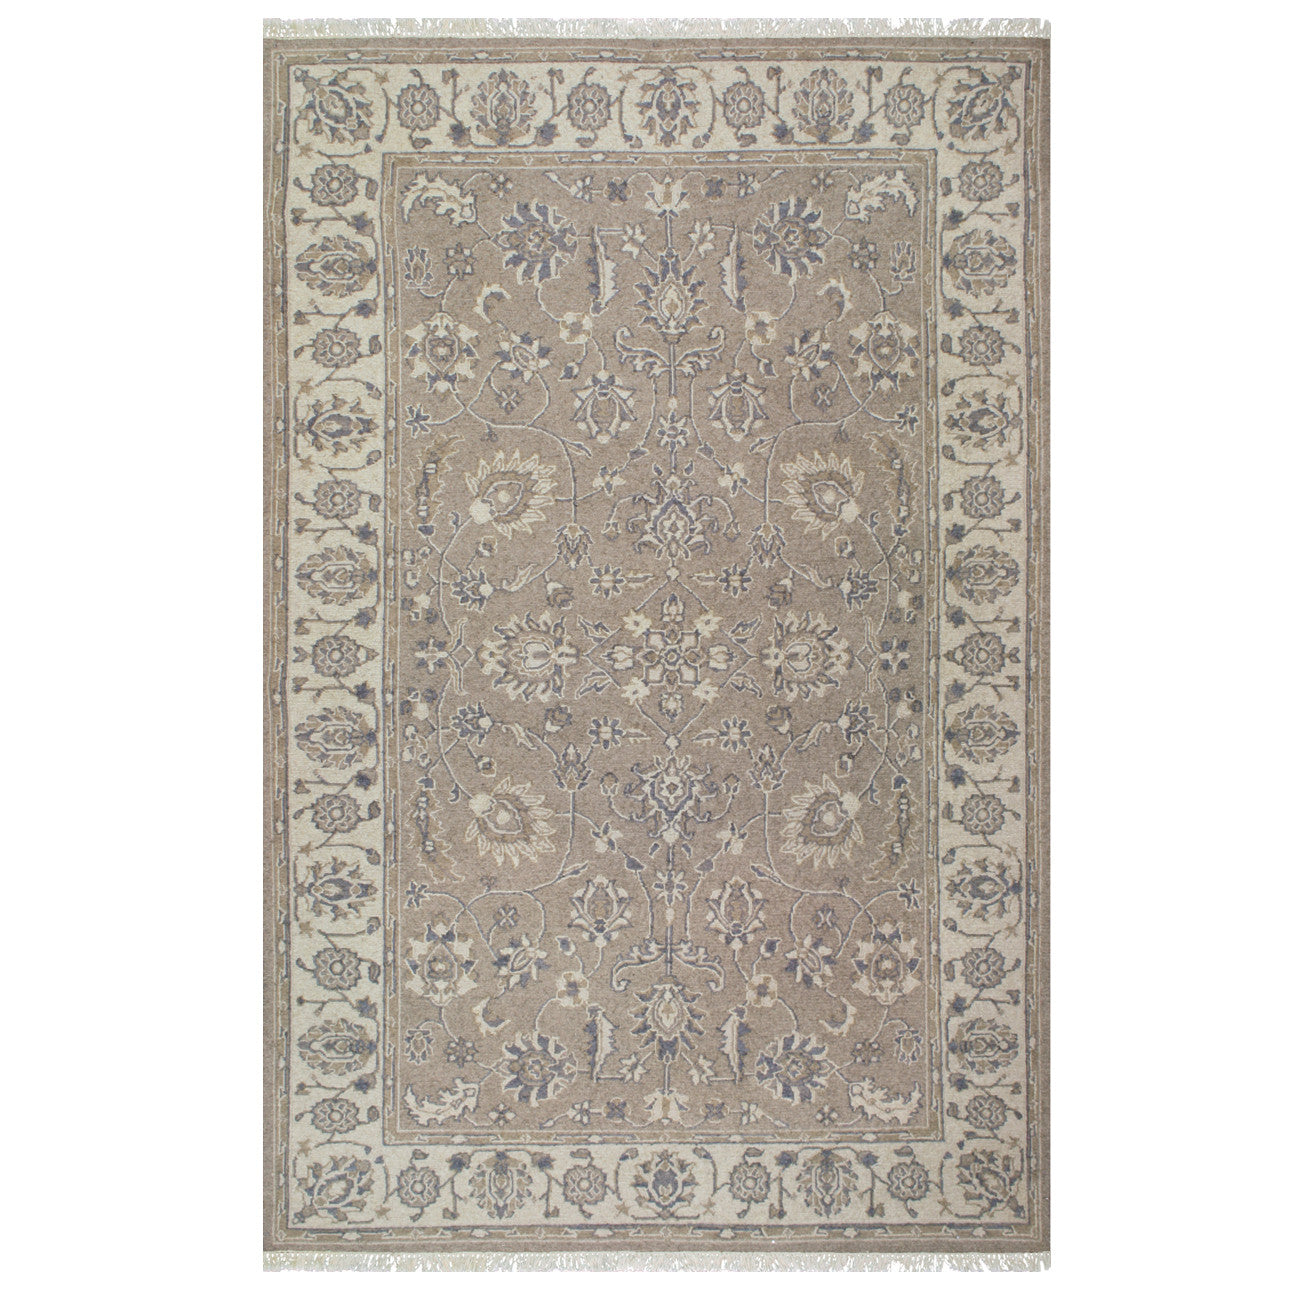 Traditions Neutral Rug